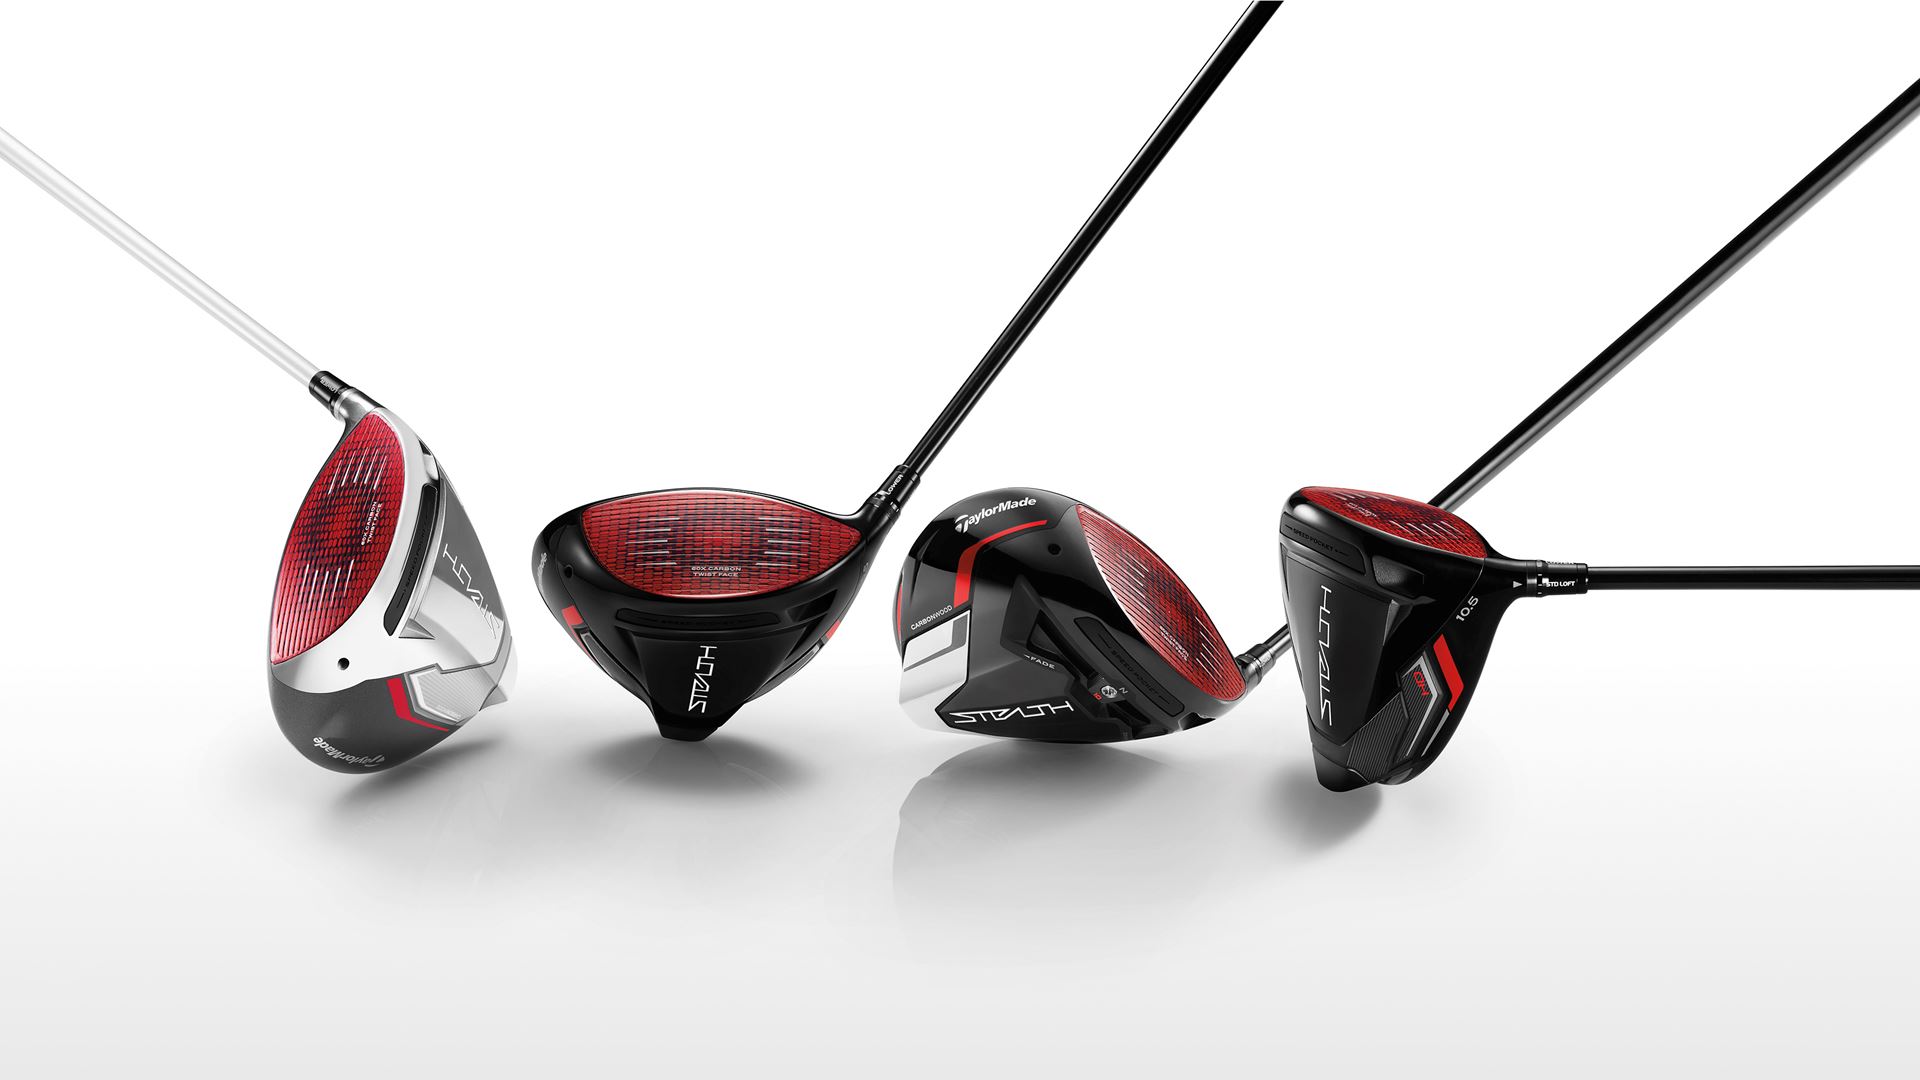 Welcome to the Carbonwood™ Age: TaylorMade Golf Company Announces Historic Technological Innovation With Carbon Face Stealth™ Family of Drivers